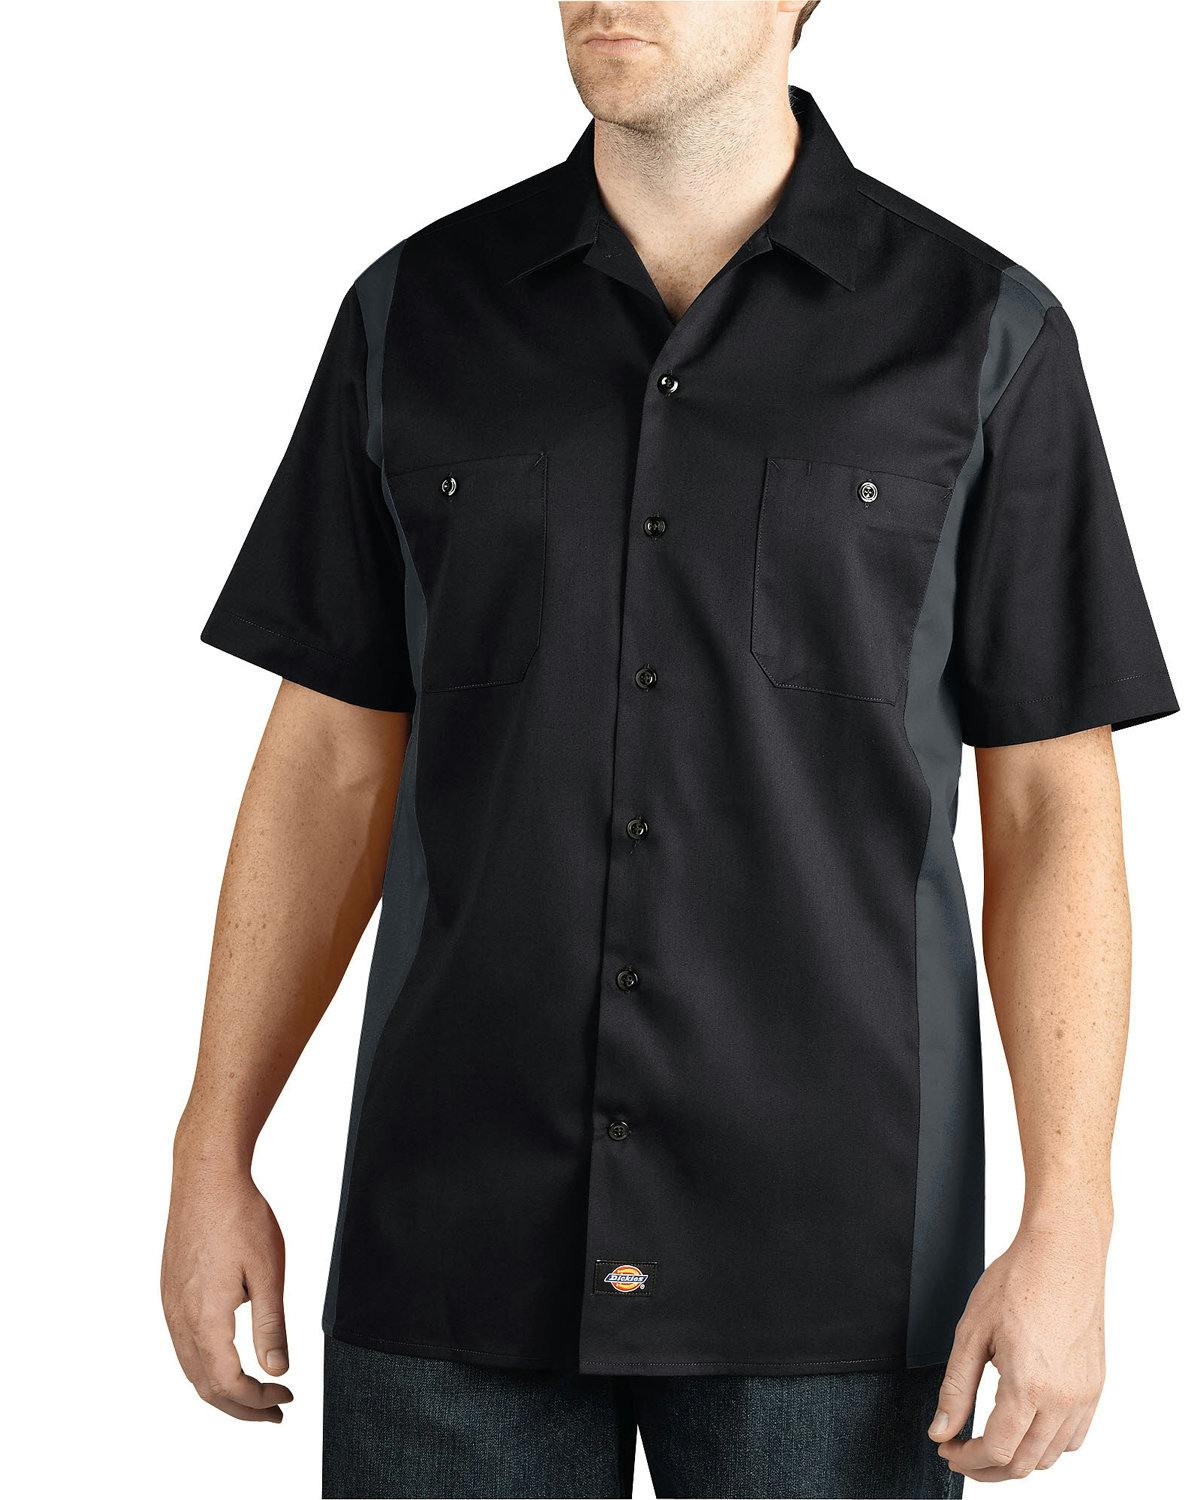 Image for Men's Two-Tone Short-Sleeve Work Shirt